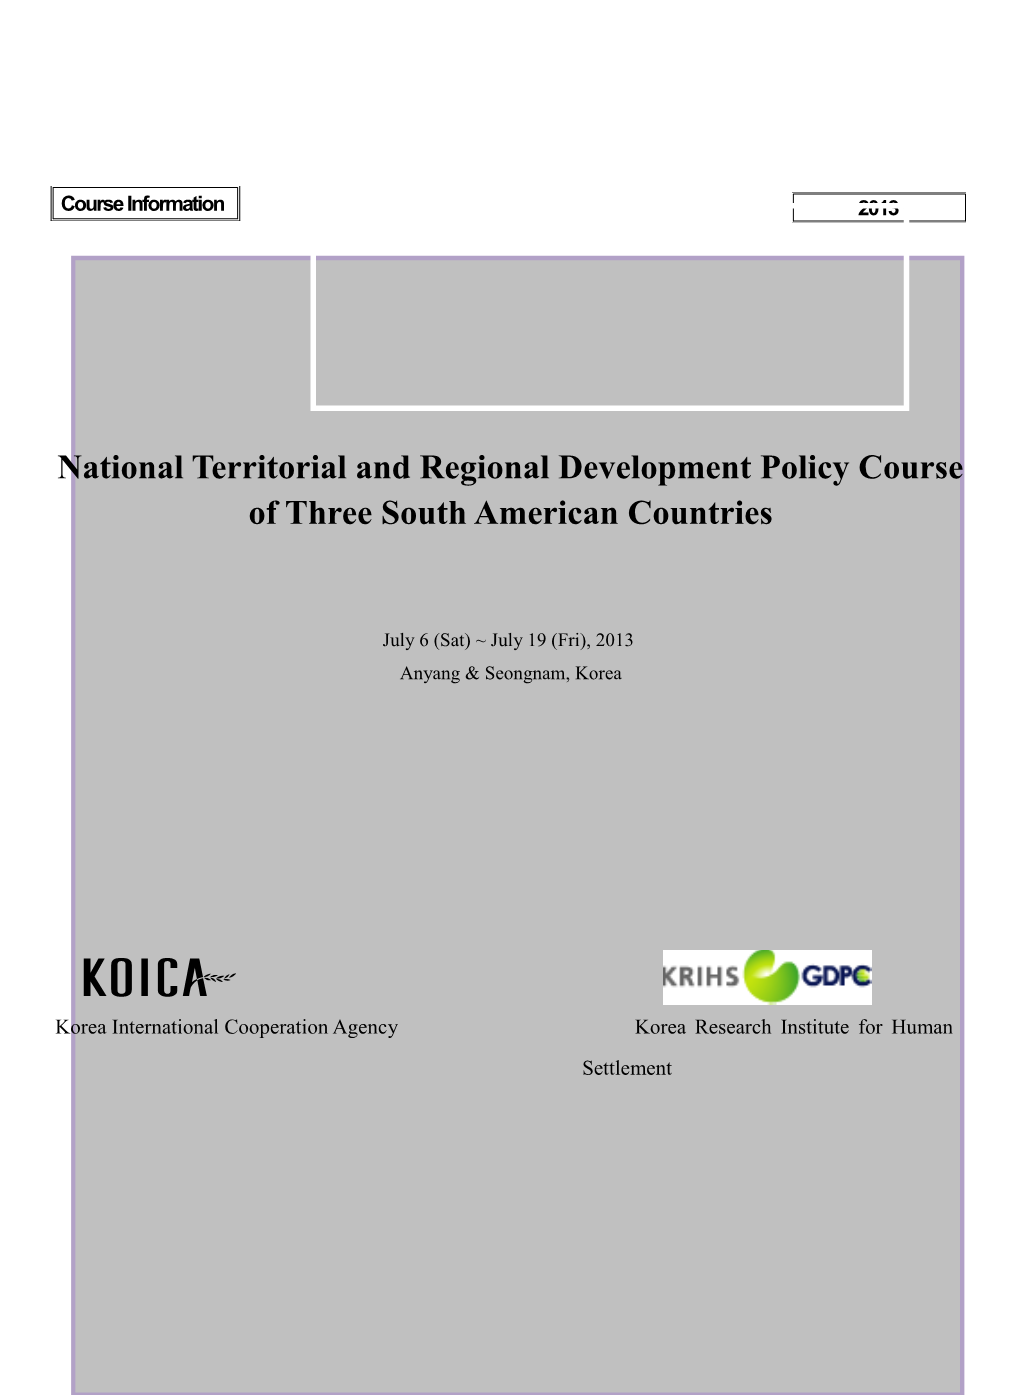 National Territorial and Regional Development Policy Course of Three South American Countries